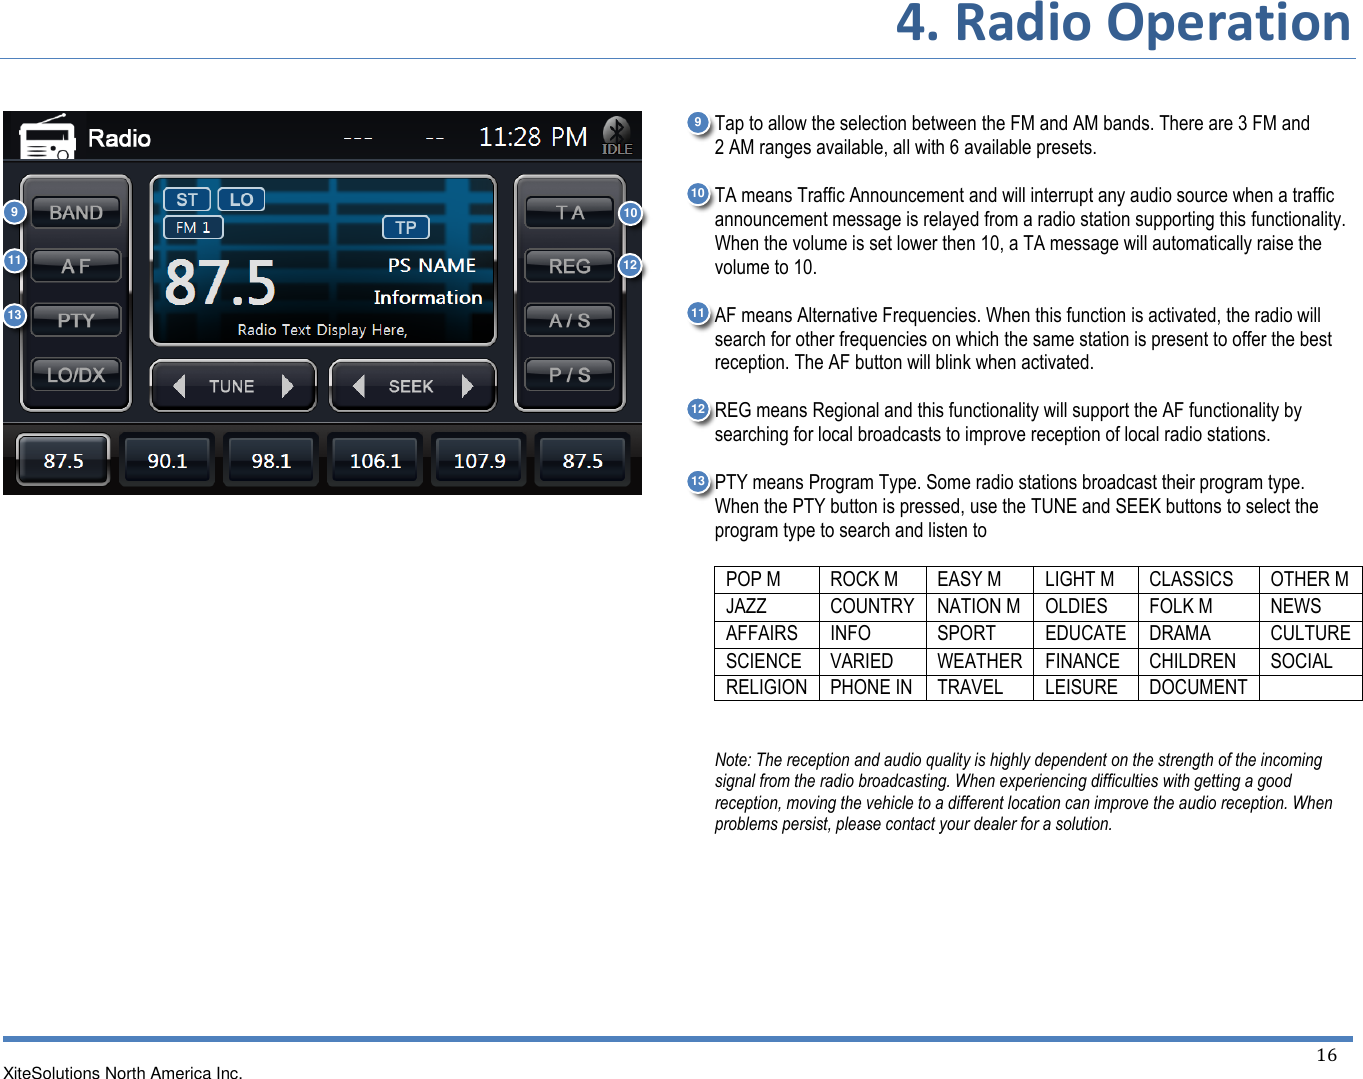 4. Radio Operation  XiteSolutions North America Inc.    16                         Tap to allow the selection between the FM and AM bands. There are 3 FM and 2 AM ranges available, all with 6 available presets.  TA means Traffic Announcement and will interrupt any audio source when a traffic announcement message is relayed from a radio station supporting this functionality. When the volume is set lower then 10, a TA message will automatically raise the volume to 10.  AF means Alternative Frequencies. When this function is activated, the radio will search for other frequencies on which the same station is present to offer the best reception. The AF button will blink when activated.  REG means Regional and this functionality will support the AF functionality by searching for local broadcasts to improve reception of local radio stations.  PTY means Program Type. Some radio stations broadcast their program type. When the PTY button is pressed, use the TUNE and SEEK buttons to select the program type to search and listen to  POP M ROCK M EASY M LIGHT M CLASSICS OTHER M JAZZ COUNTRY NATION M OLDIES FOLK M NEWS AFFAIRS INFO SPORT EDUCATE DRAMA CULTURE SCIENCE VARIED WEATHER FINANCE CHILDREN SOCIAL RELIGION PHONE IN TRAVEL LEISURE DOCUMENT    Note: The reception and audio quality is highly dependent on the strength of the incoming signal from the radio broadcasting. When experiencing difficulties with getting a good reception, moving the vehicle to a different location can improve the audio reception. When problems persist, please contact your dealer for a solution.  12 9 10  11  13 9 11  10  12 13 